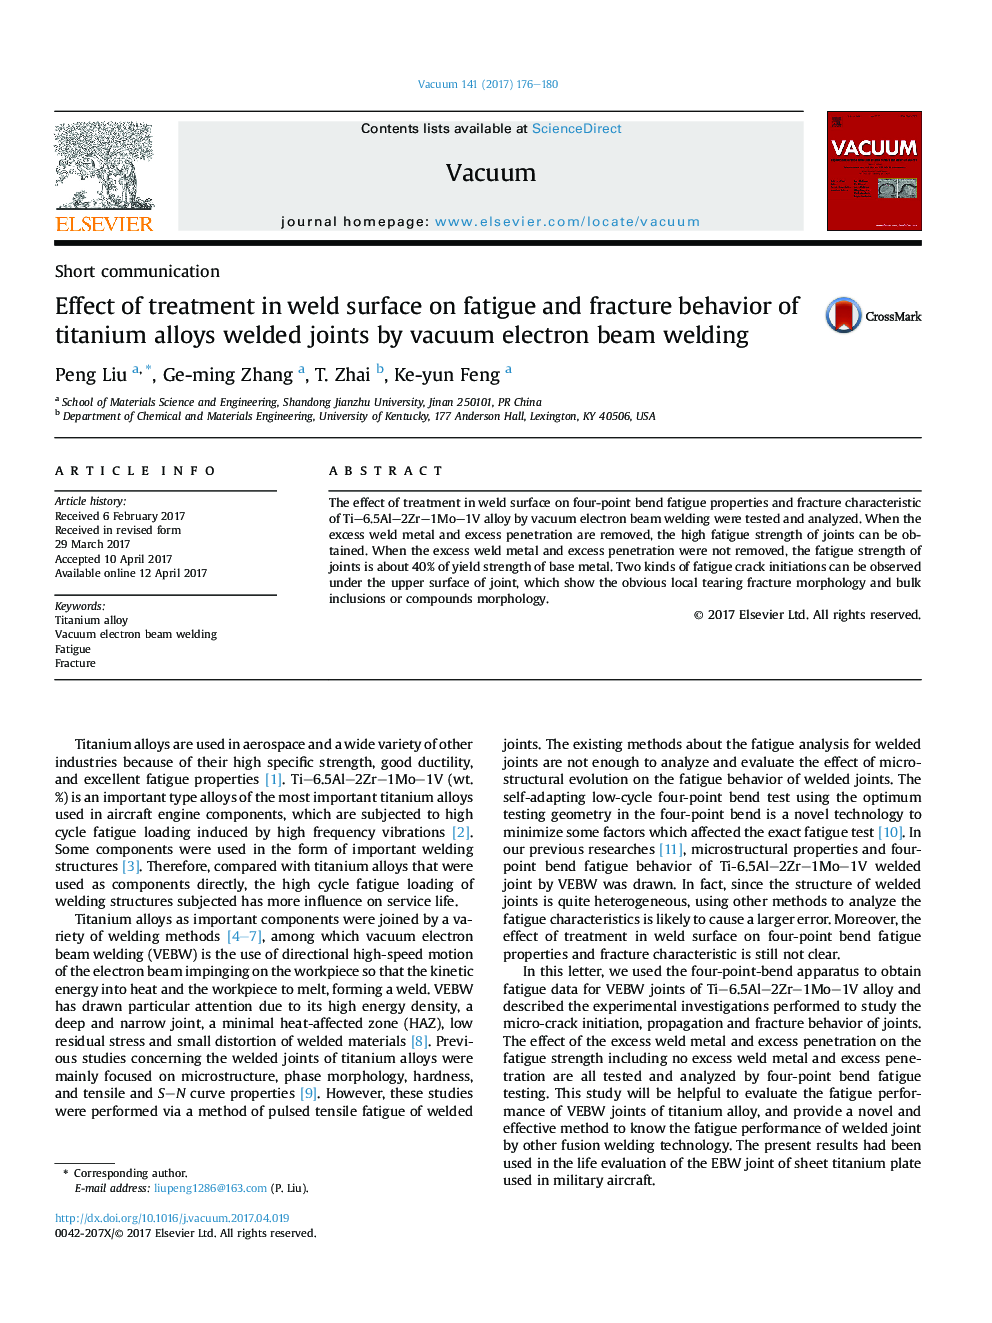 Effect of treatment in weld surface on fatigue and fracture behavior of titanium alloys welded joints by vacuum electron beam welding